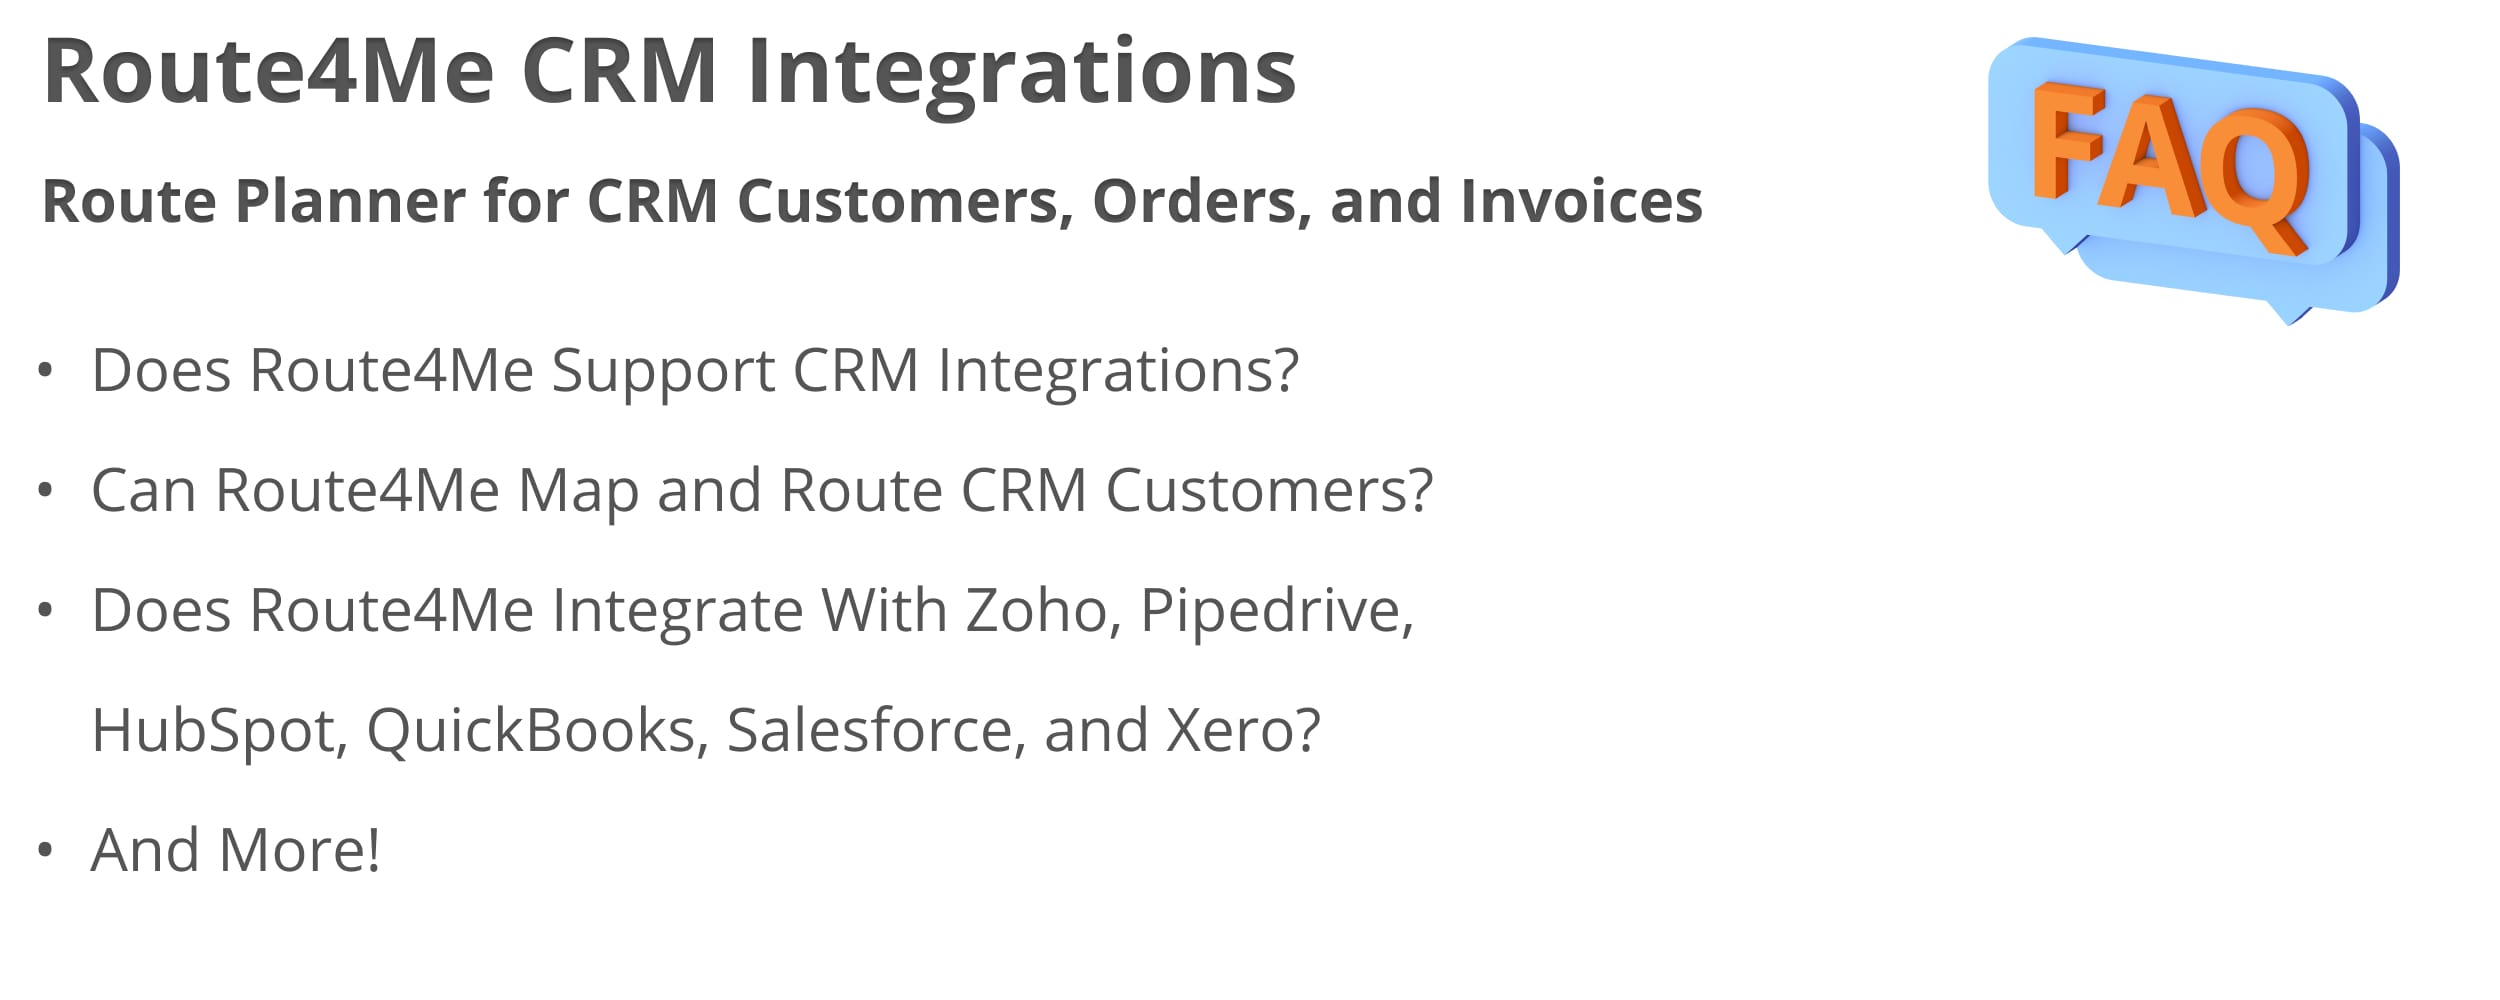 The most frequently asked questions about Route4Me's CRM Integrations and route planning with CRM customers, orders, and invoices.